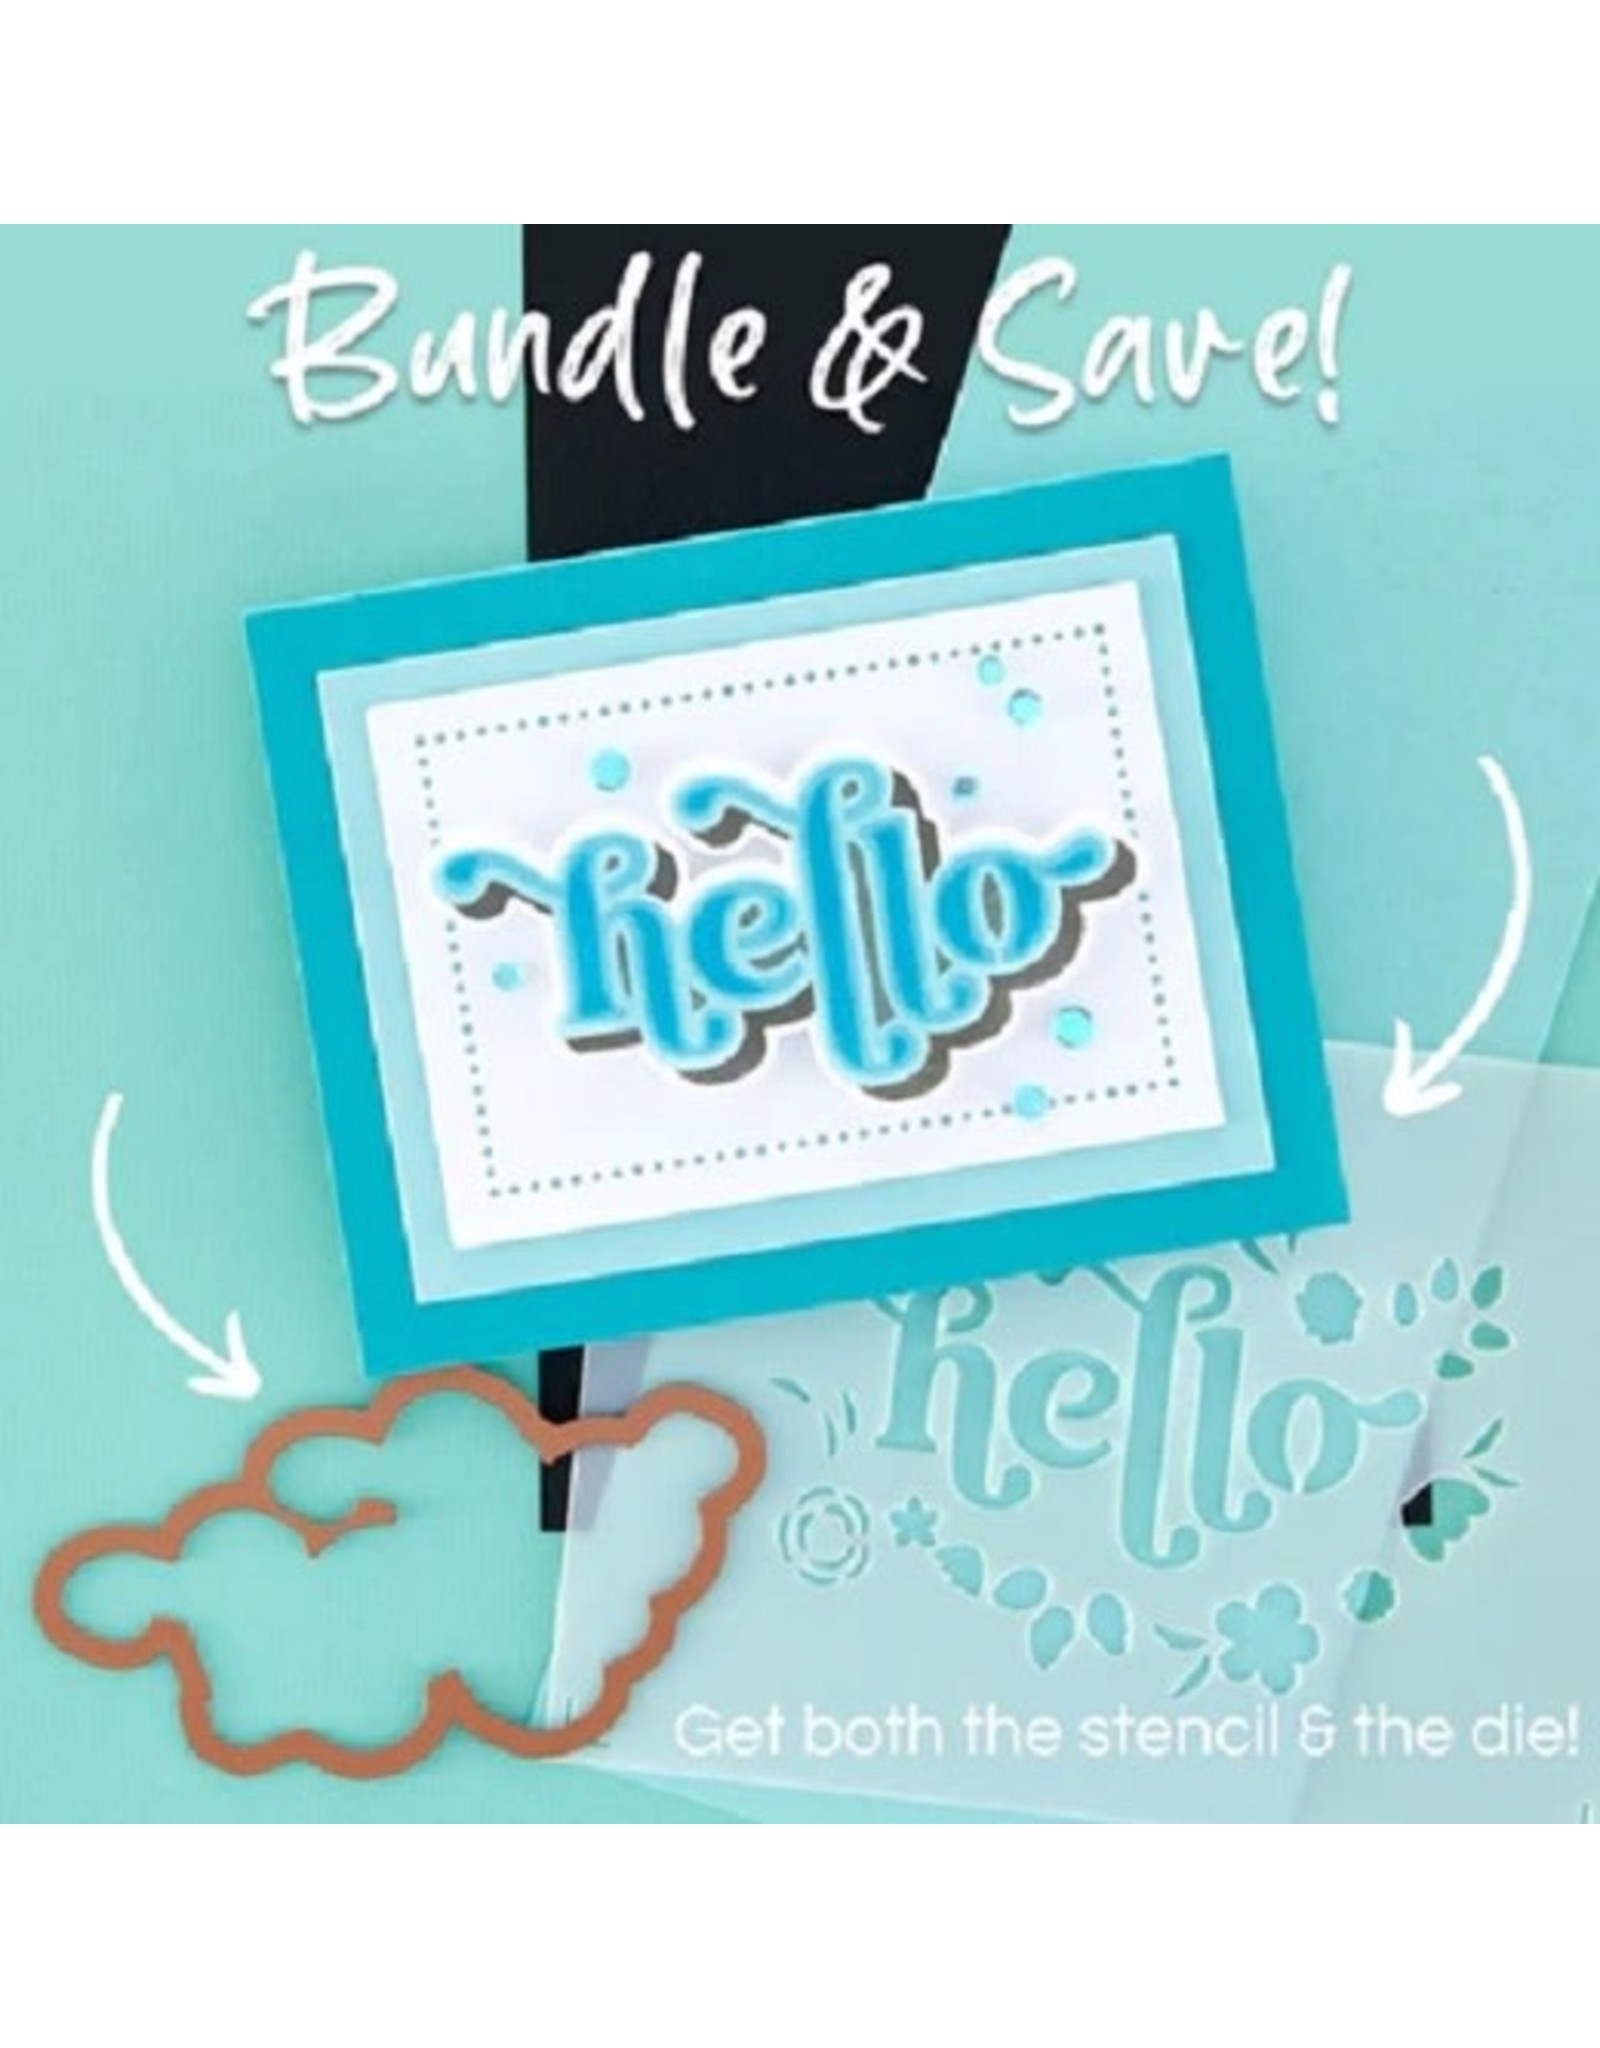 Spellbinders Layered Stencils Collection - Floral Hello Stencil and Die Set